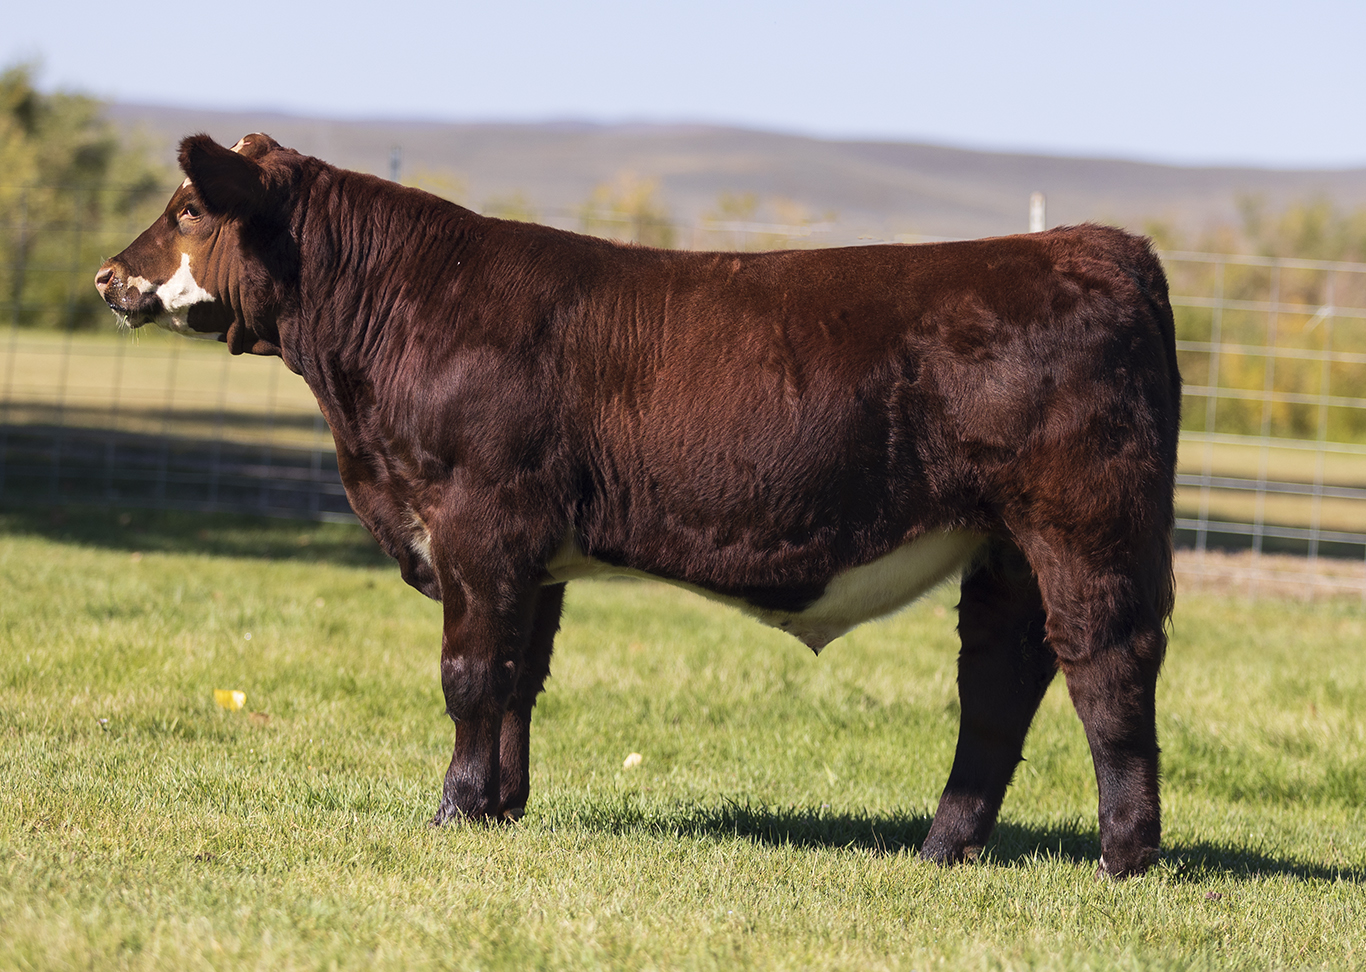 Tag 604 Bet on Red x Steel Force  Bull